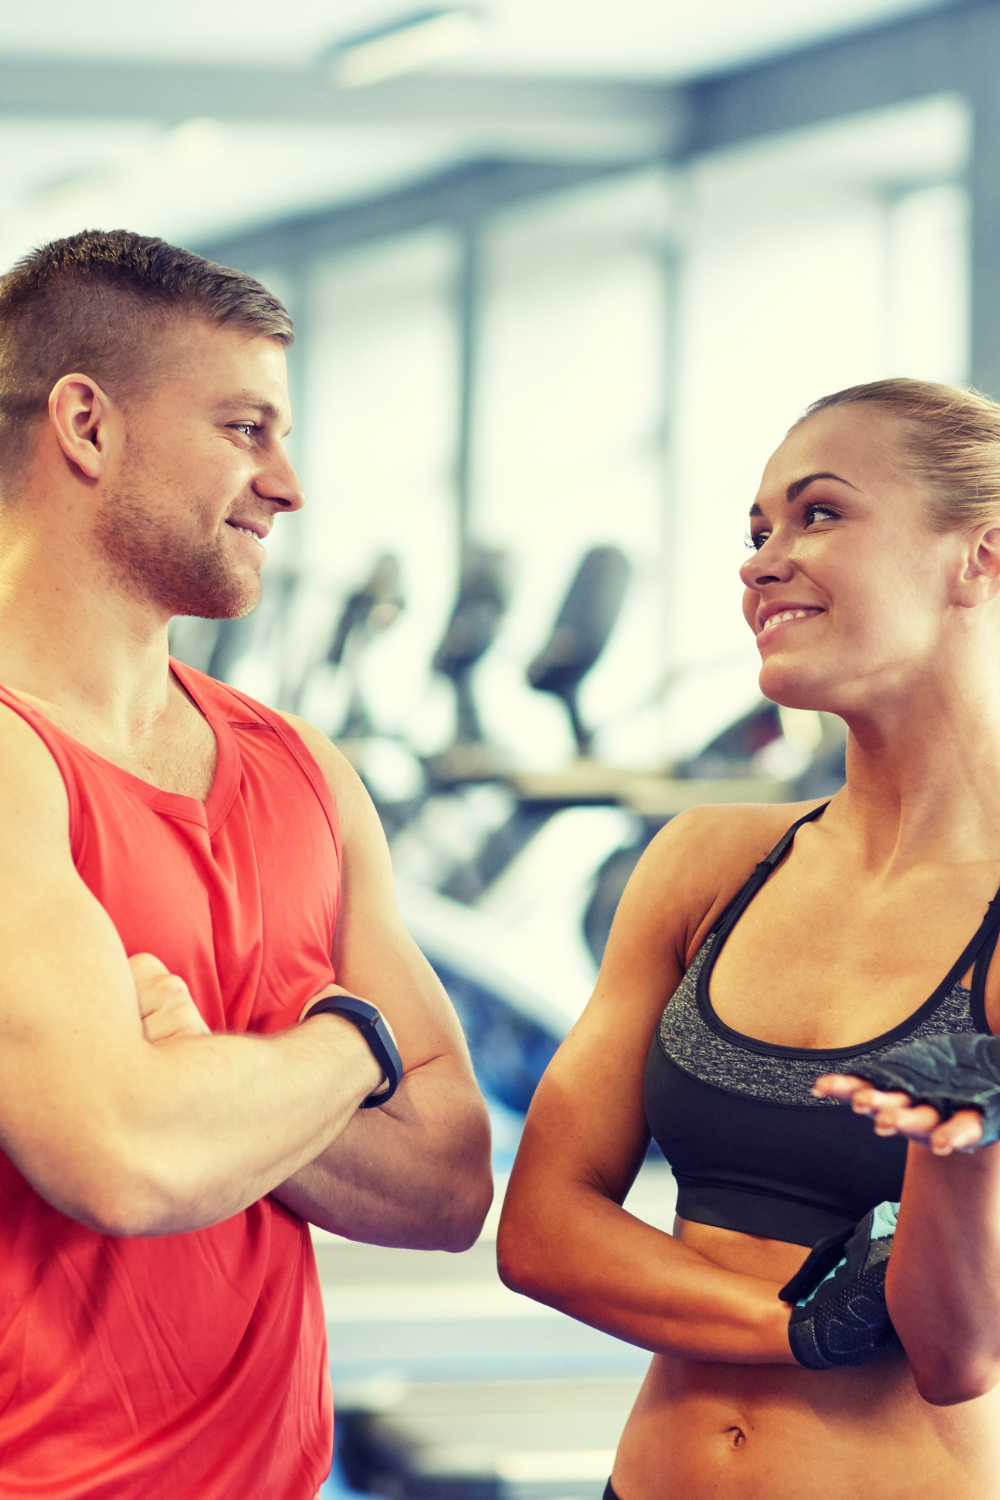  Signs a Guy at The Gym is Interested in You